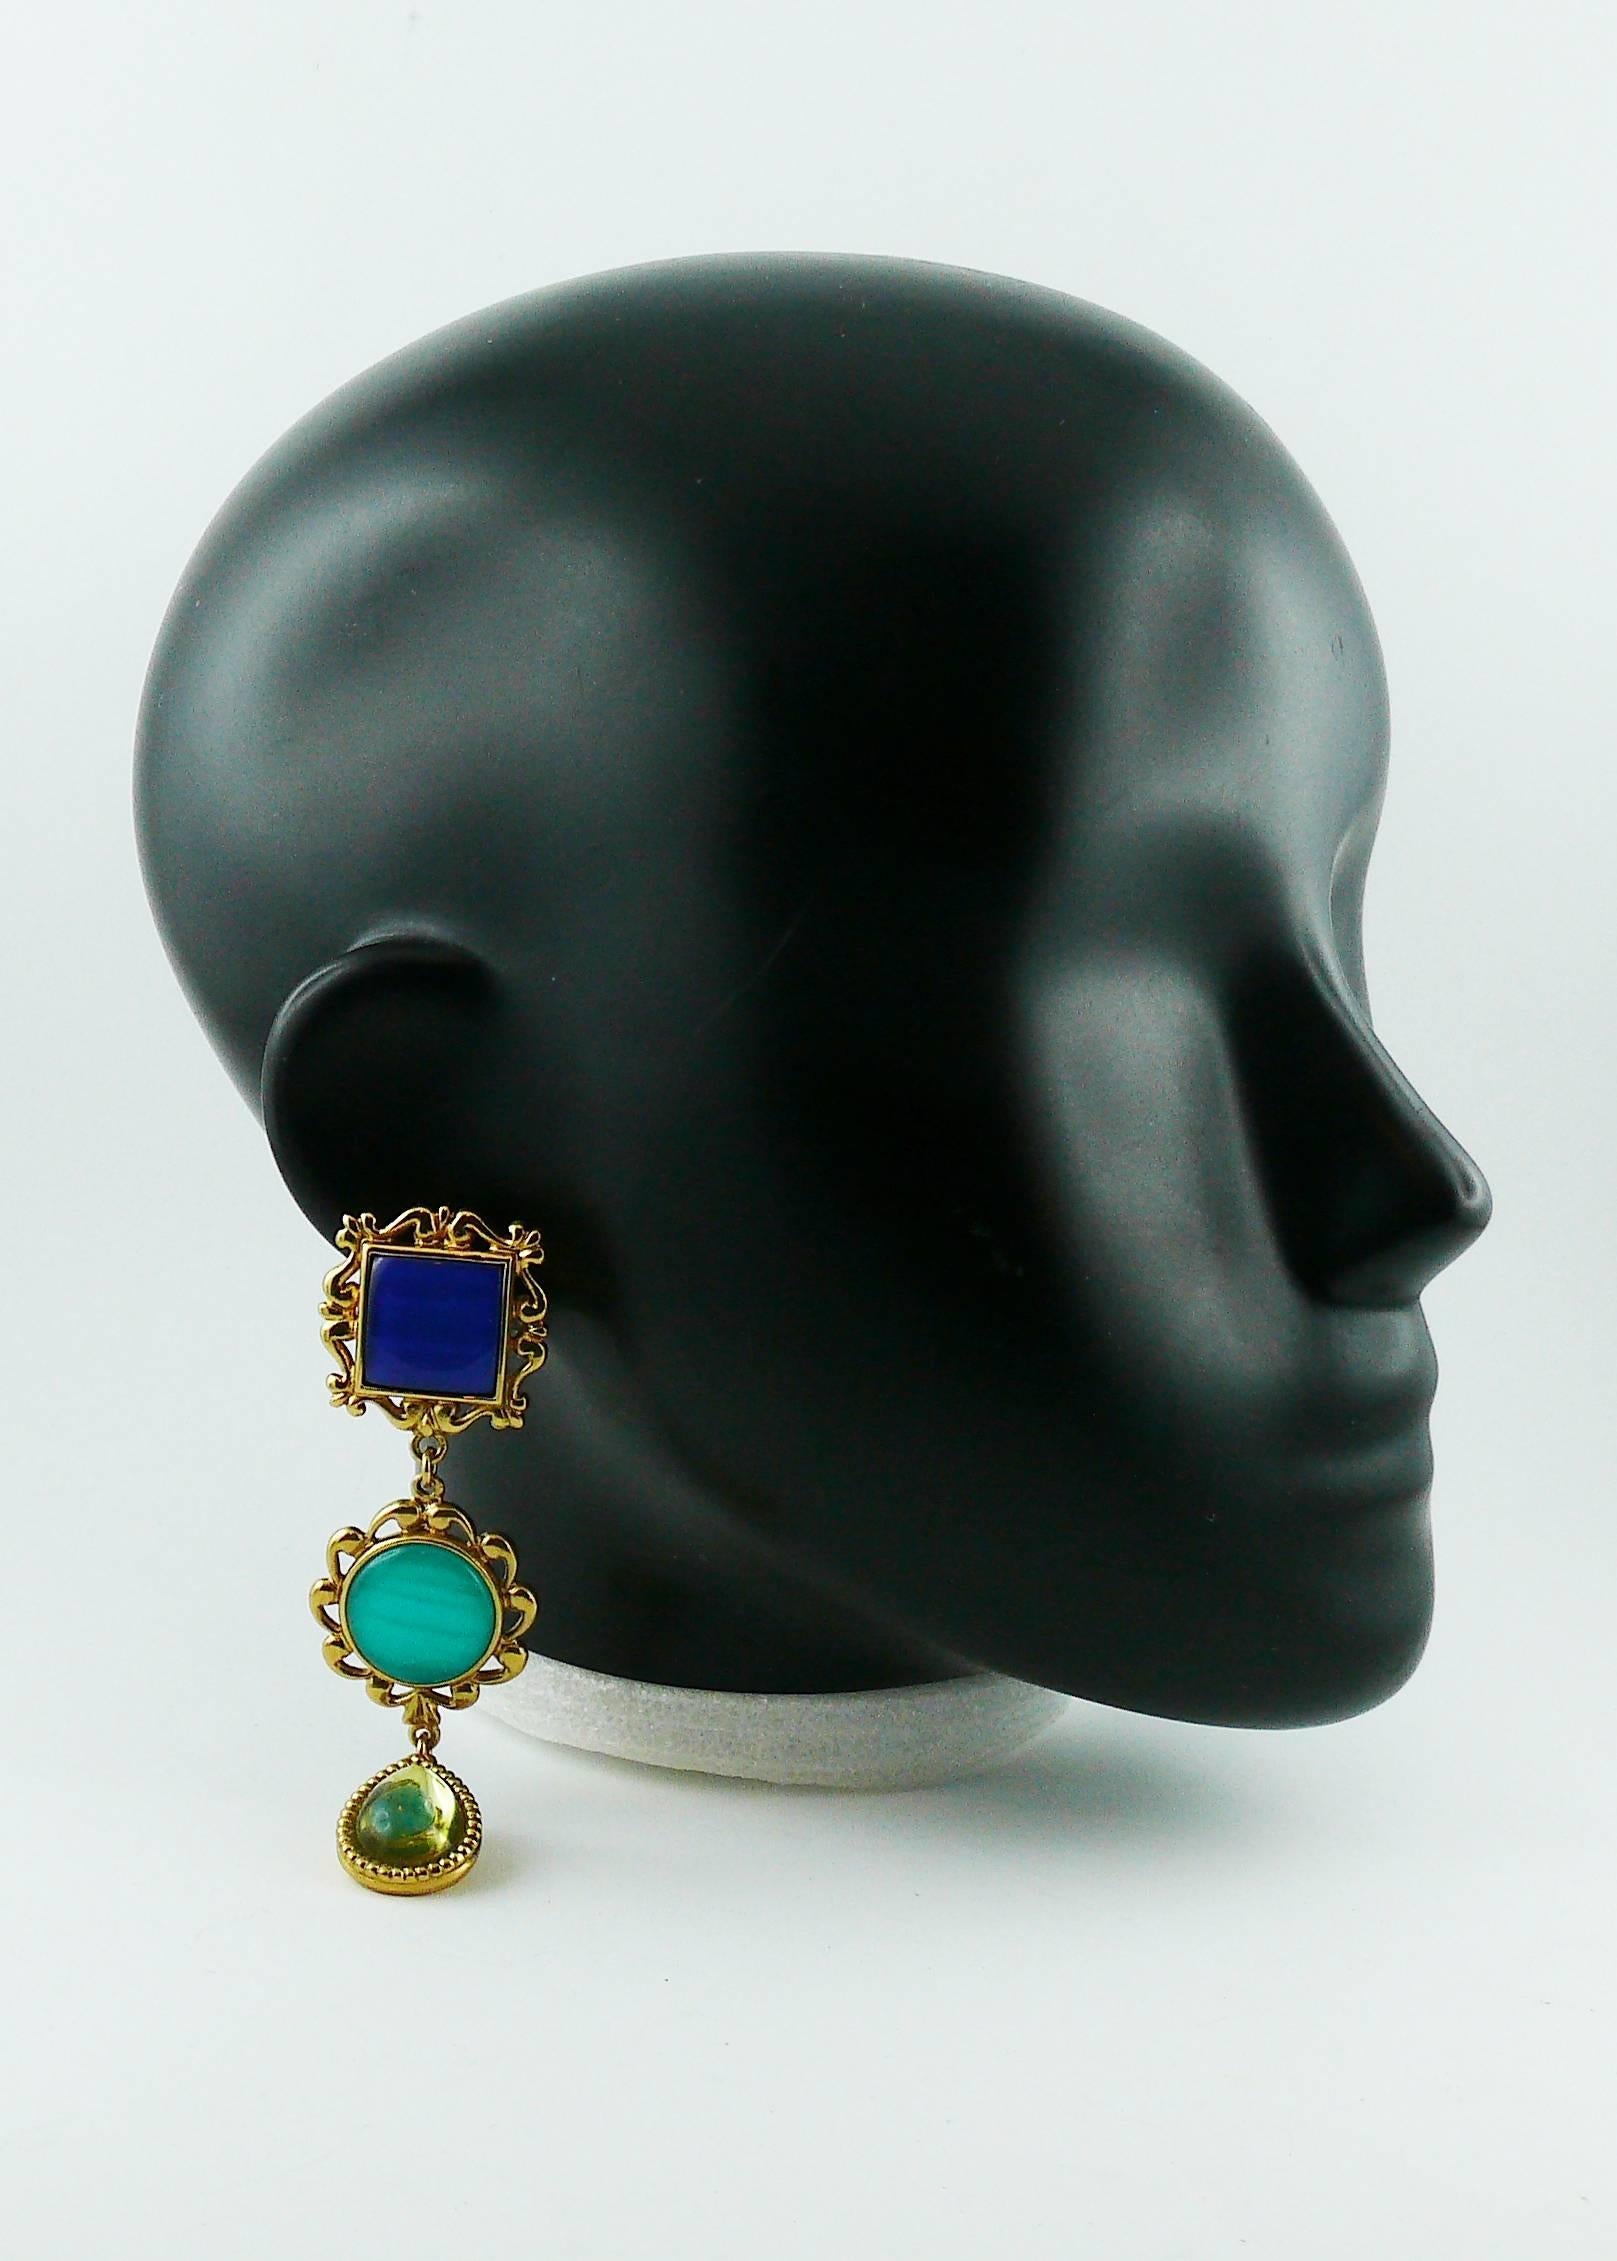 YVES SAINT LAURENT vintage gold toned dangling earrings (clip-on) featuring multicolored gometric elements (square in blue, circle in turquoise and pear in light olive).

Marked YVES SAINT LAURENT Made in France.

Indicative measurements : height